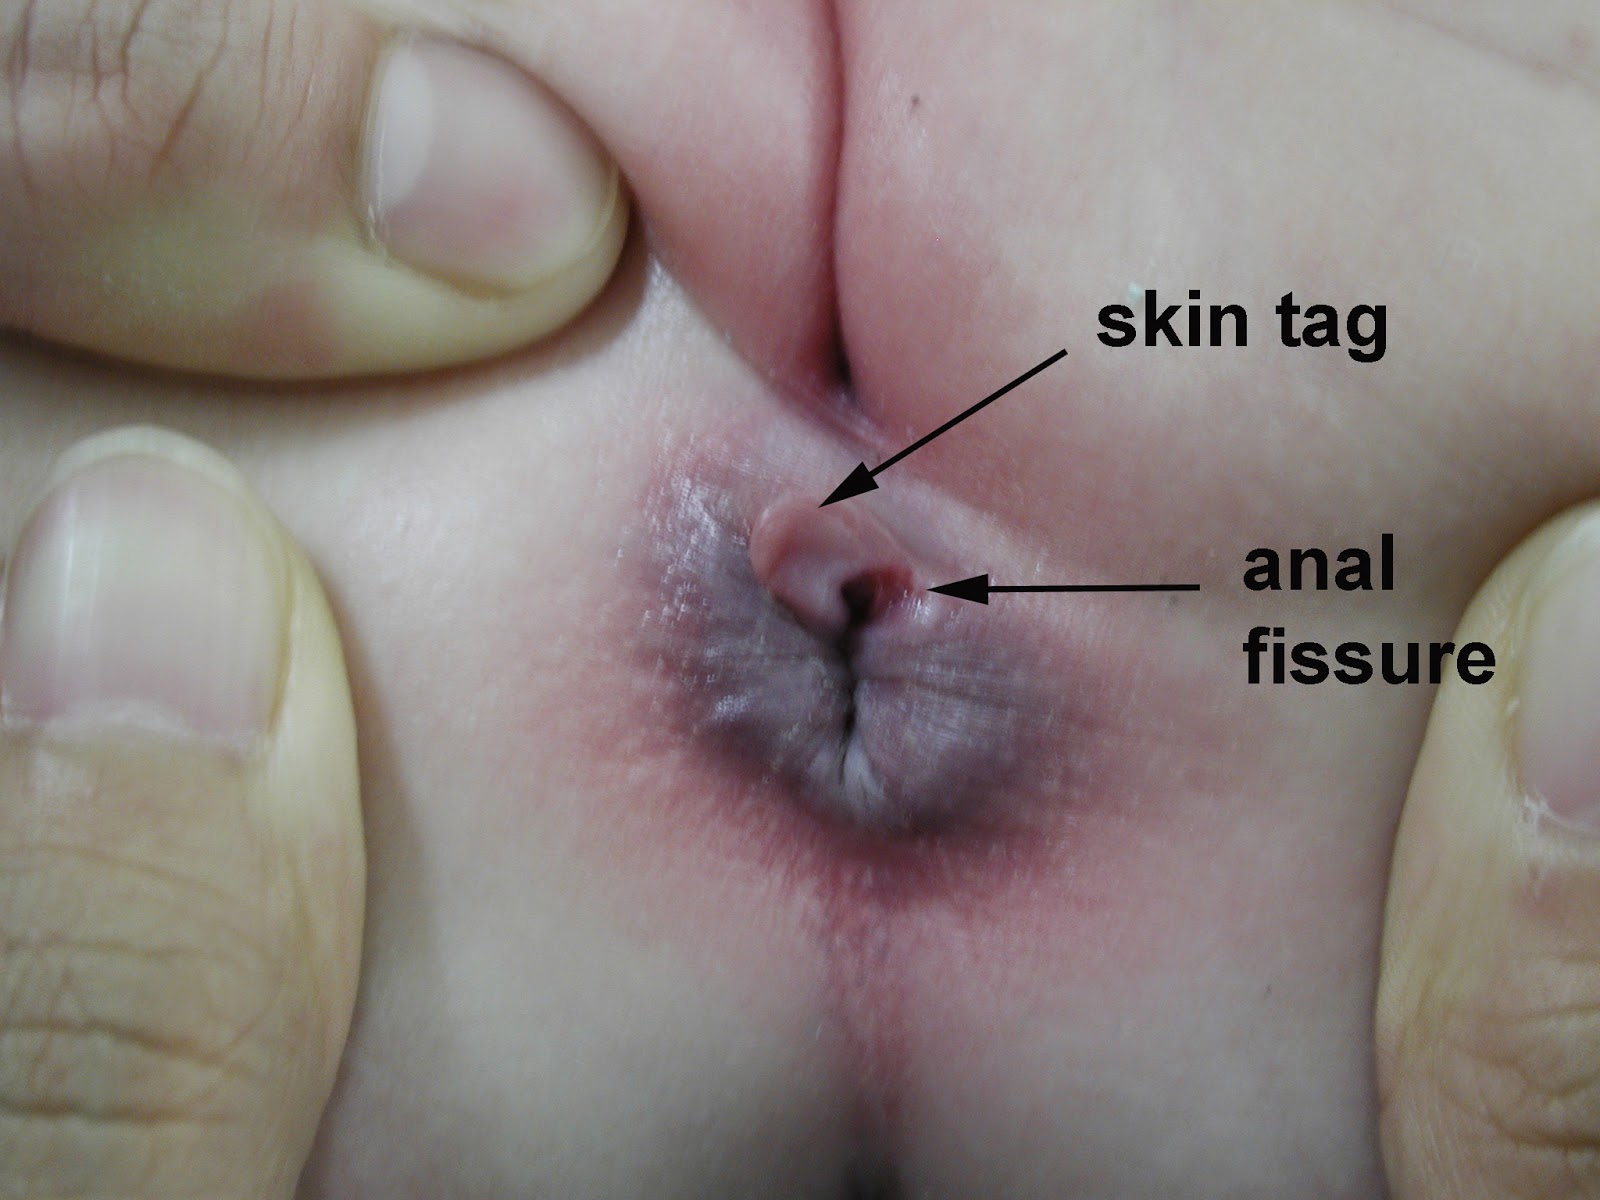     Anal Fissure The anal fissure is a small tear in the lining of the anus. The anal fissure can cause pain, bleeding and/or itching. Most fissures occur along the mid-line - the top or bottom - of the anus.  Causes of Anal Fissure  The anal fissure usually develops when the anal tissue is damaged during a hard and dry bowel movement which tears the anal lining.  The anal fissure can also develop due to higher than normal pressure in the anal sphincters. Diarrhoea and inflammation of the anorectal area can also cause an anal fissure.  Many women during childbirth develop an anal fissure.   Other causes of the anal fissure are:  • Digital insertion (during examination),  • Foreign body insertion,   • Anal intercourse.  In some cases, the anal fissure may be caused by other health conditions, such as:  • Vitamin B-6 deficiency,  • Abdominal pain,  • Fever,  • Weight loss,  • Crohn's disease,  • Inflammatory bowel disease (IBD) that causes bloody diarrhoea,  • Syphilis, a suppressed immune system,  • Tuberculosis,  • HIV infection,  • Anal cancer.  • A low fibre diet may also contribute to the development of a fissure.  Symptoms of Anal Fissure • Sharp, stinging or burning pain during and following a bowel movement.  • Spots of bright red blood on toilet tissue. This blood is separate from the stool. Blood mixed with the stool indicates some other conditions (like colon cancer and inflammatory bowel disease).  • Itching and malodorous discharge may also occur.  Anal Fissure Treatment  Symptomatic Homeopathy works well for Anal fissure, It helps to prevent further recurrence also. So its good to consult a experienced Homeopathy physician without any hesitation.    Whom to contact for Anal Fissure Treatment  Dr.Senthil Kumar Treats many cases of anal fissure, In his medical professional experience with successful results. Many patients get relief after taking treatment from Dr.Senthil Kumar.  Dr.Senthil Kumar visits Chennai at Vivekanantha Homeopathy Clinic, Velachery, Chennai 42. To get appointment please call 9786901830, +91 94430 54168 or mail to consult.ur.dr@gmail.com,    For more details & Consultation Feel free to contact us. Vivekanantha Clinic Consultation Champers at Chennai:- 9786901830  Panruti:- 9443054168  Pondicherry:- 9865212055 (Camp) Mail : consult.ur.dr@gmail.com, homoeokumar@gmail.com   For appointment please Call us or Mail Us  For appointment: SMS your Name -Age – Mobile Number - Problem in Single word - date and day - Place of appointment (Eg: Rajini - 99xxxxxxx0 – Psoriasis – 21st Oct, Sunday - Chennai ), You will receive Appointment details through SMS